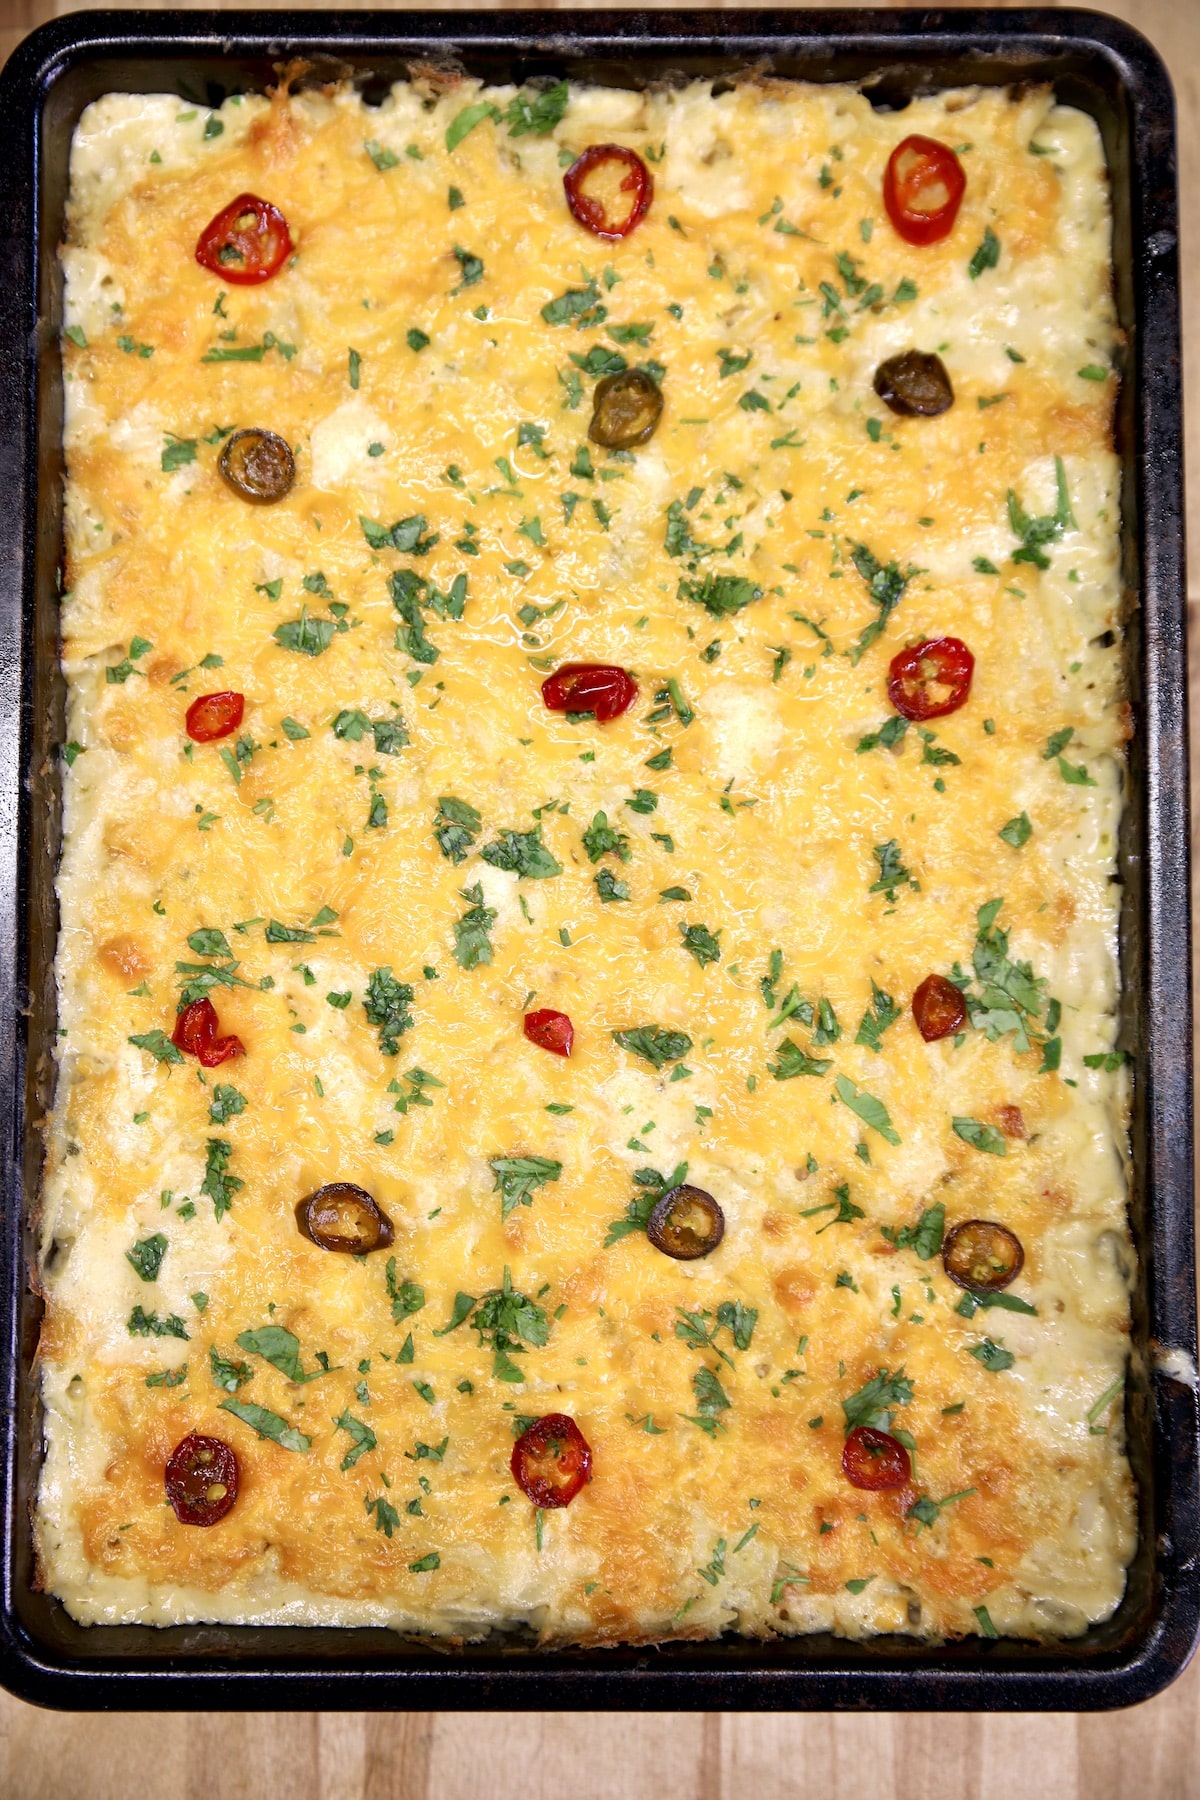 Jalapeno and cheese hashbrown casserole in a pan.